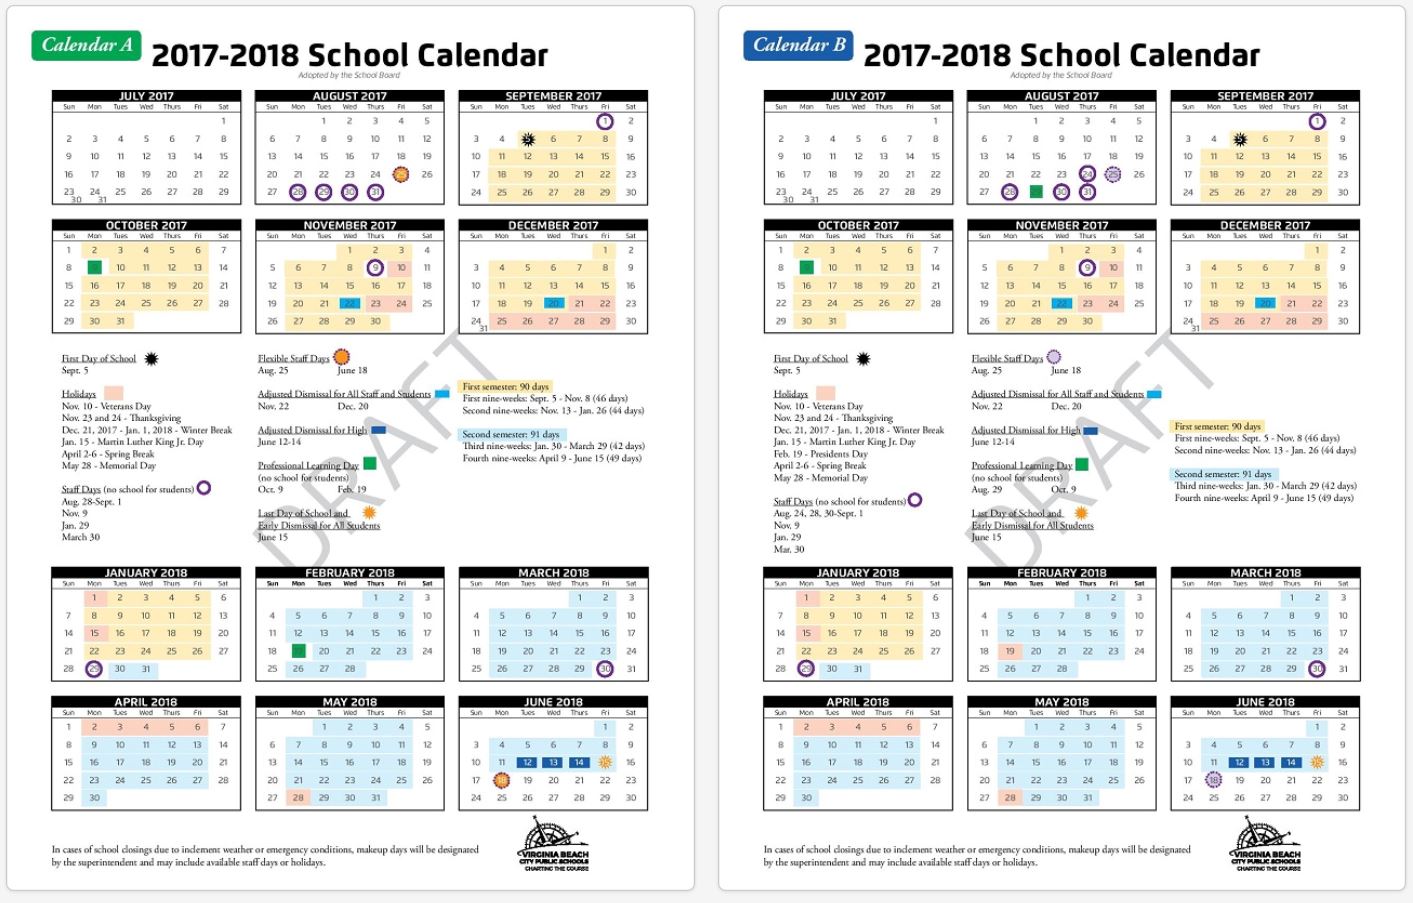 201718 school year calendar options available for review Kaleidoscope